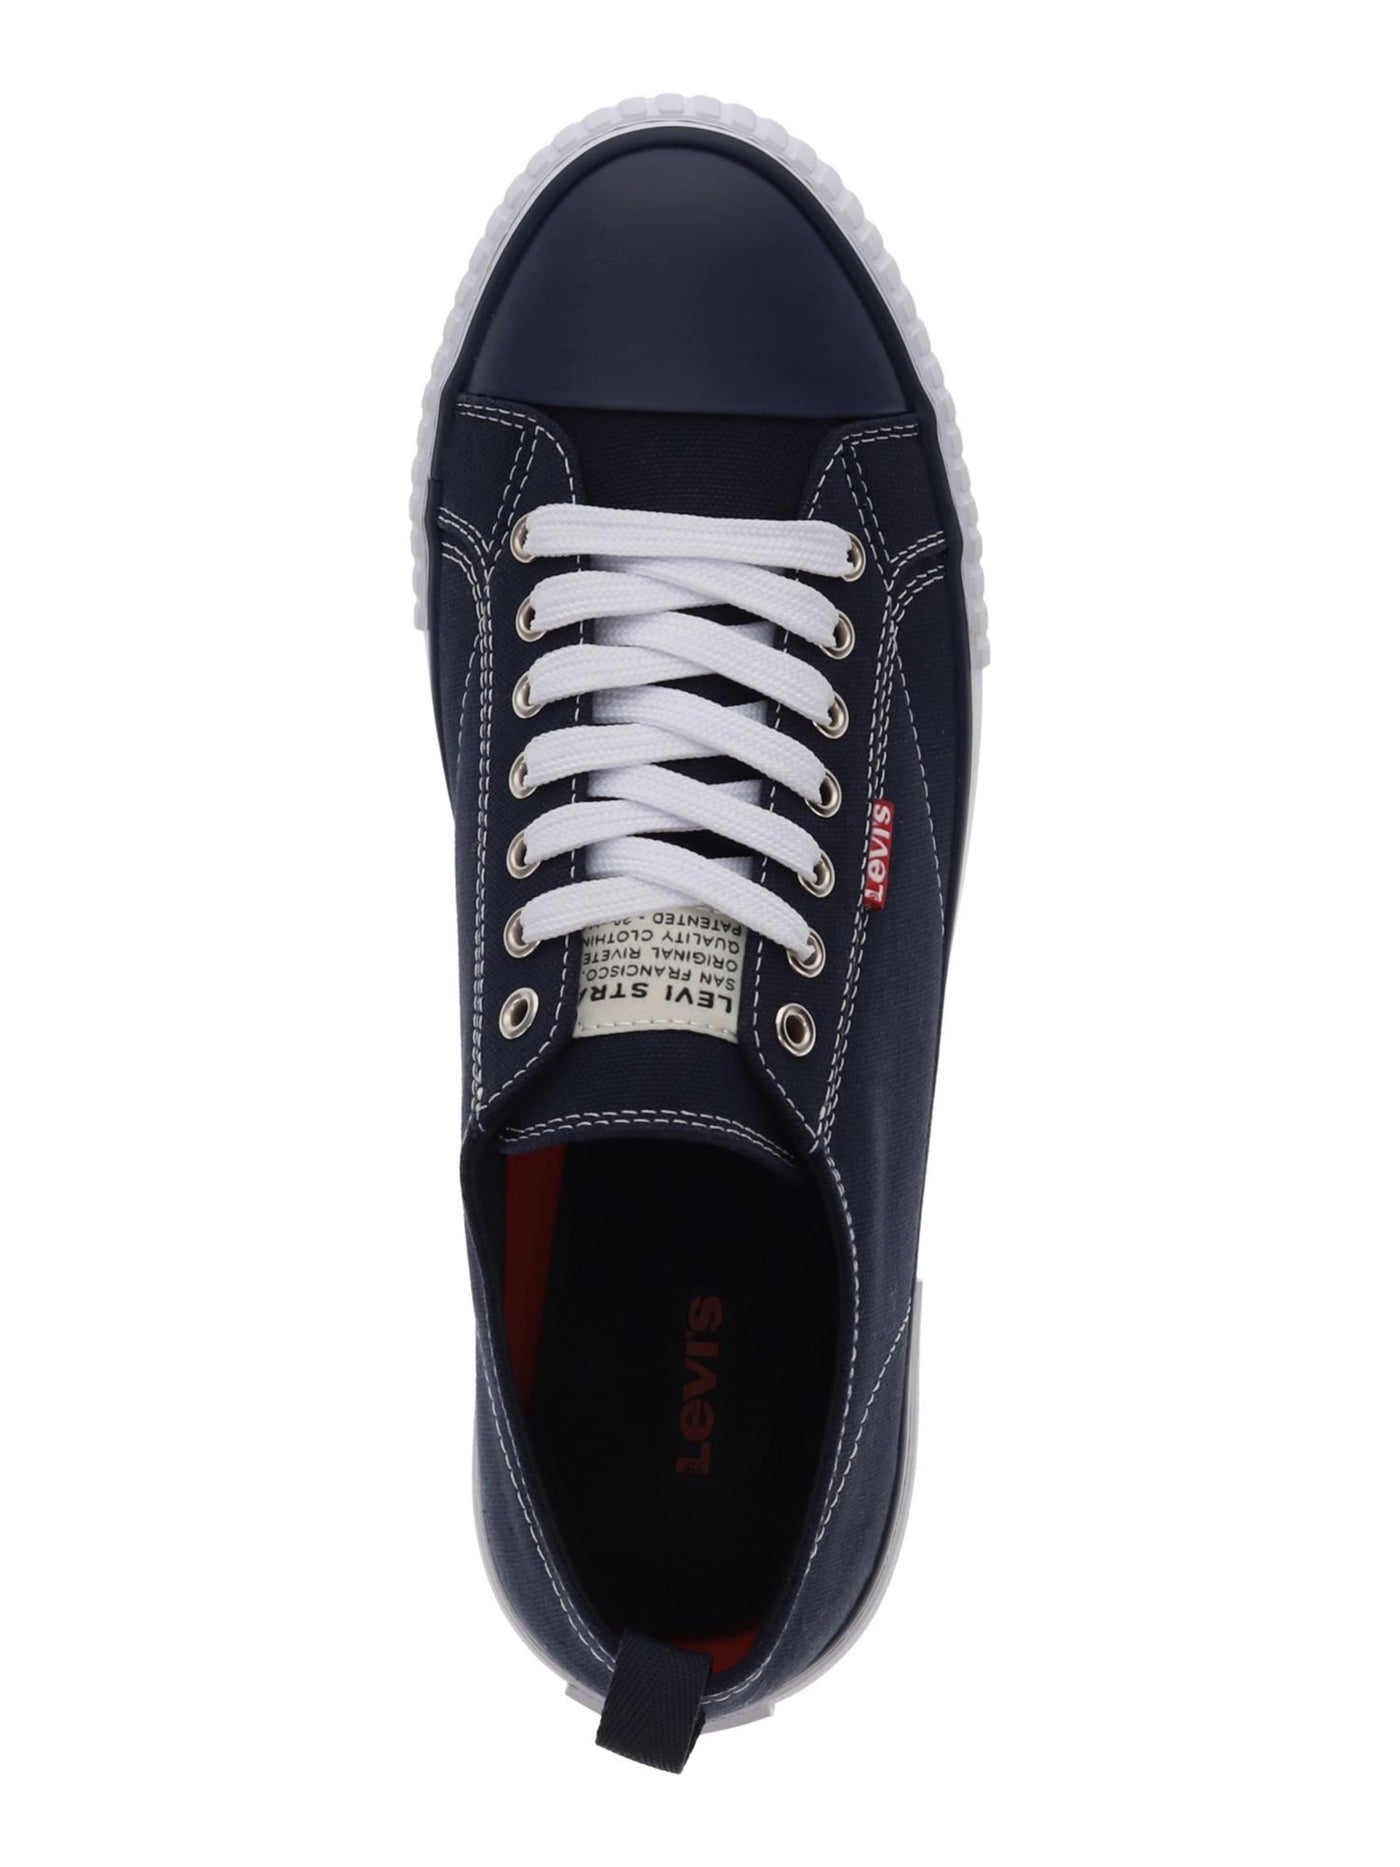 LEVI'S Mens Navy Removable Insole Cushioned Anikin Round Toe Lace-Up Sneakers Shoes 11